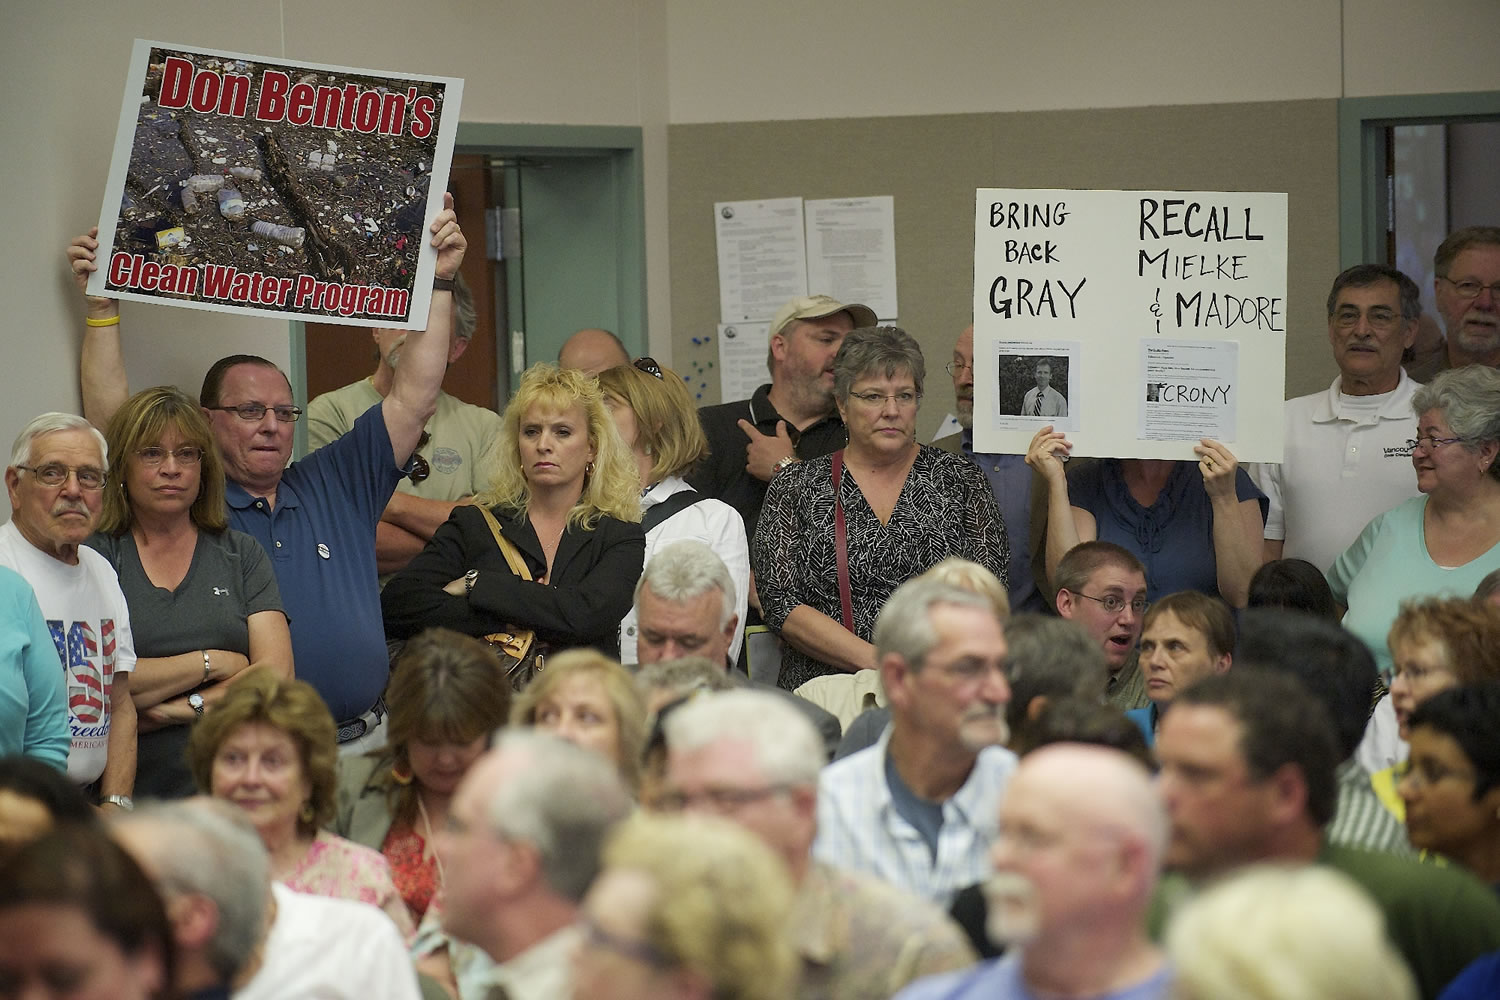 An overflow crowd was present at a Clark County Commissioners meeting at the Clark County Public Services Center Tuesday.